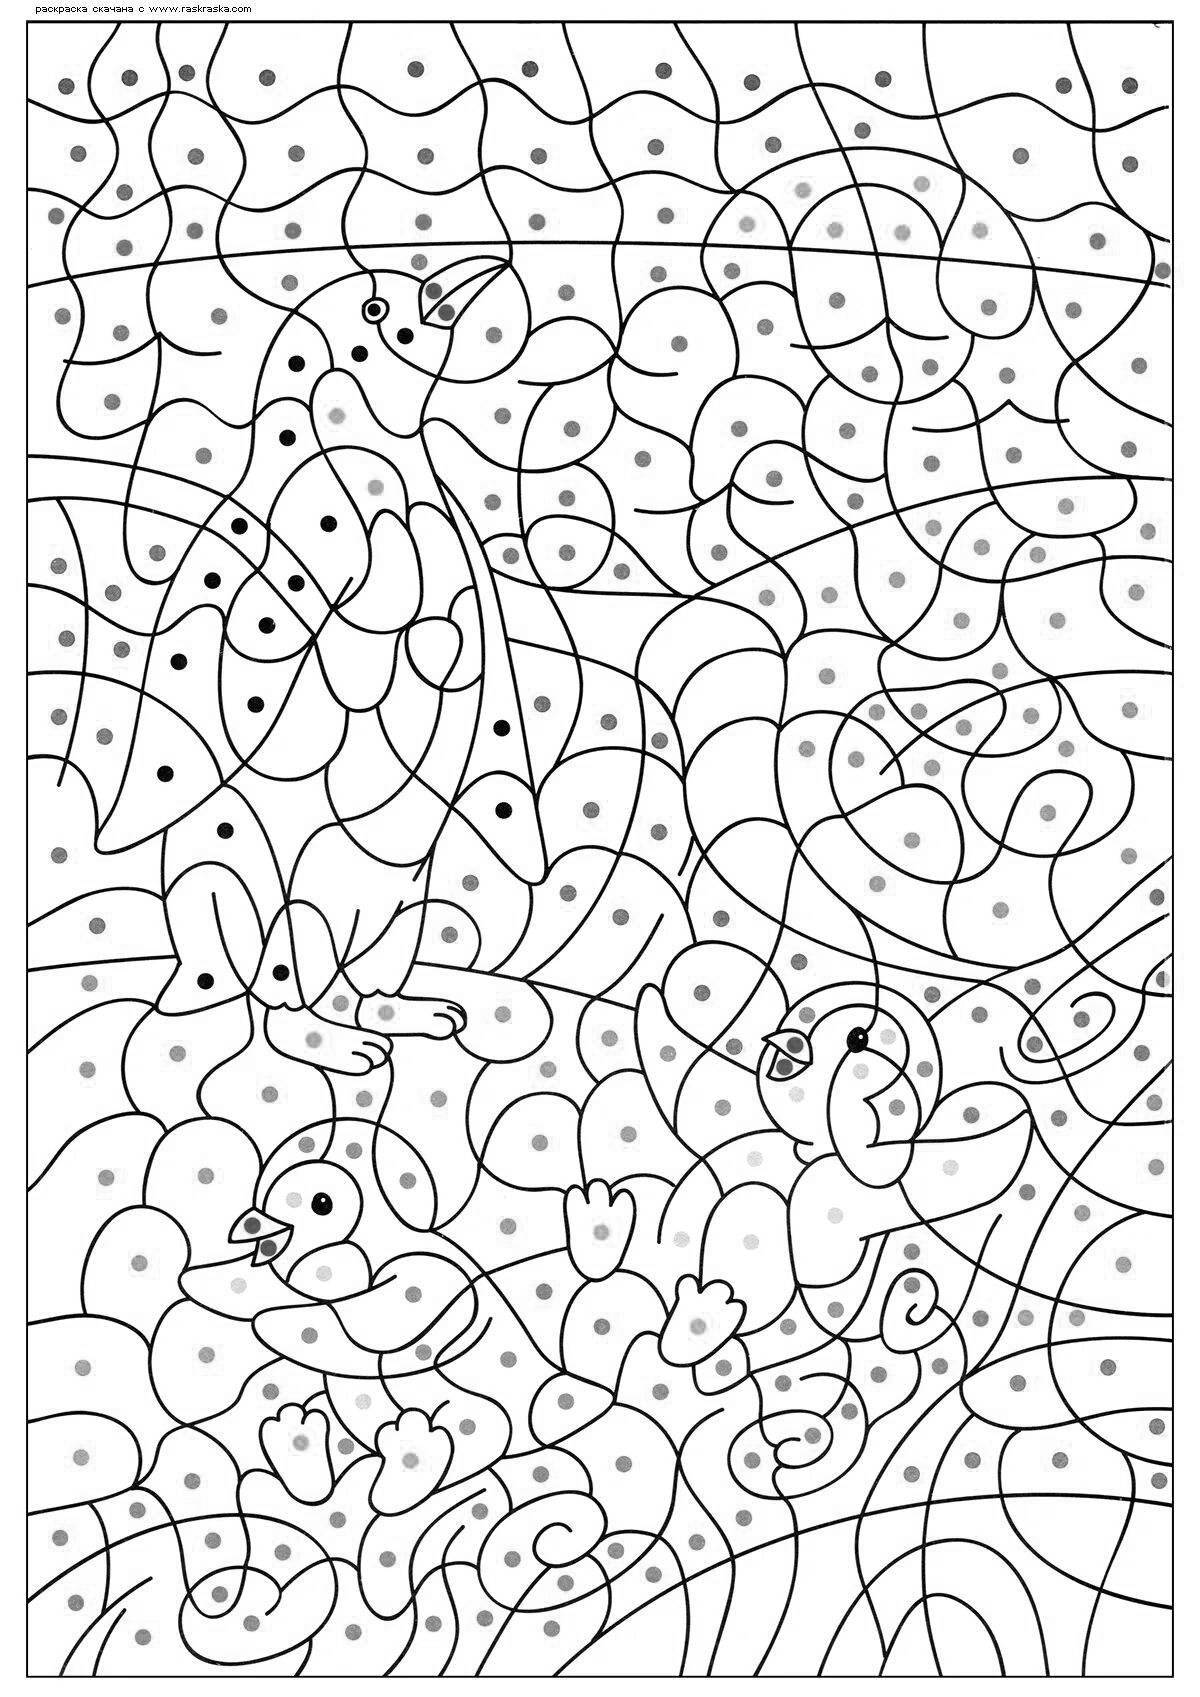 Color-frenzy penguin by numbers coloring book